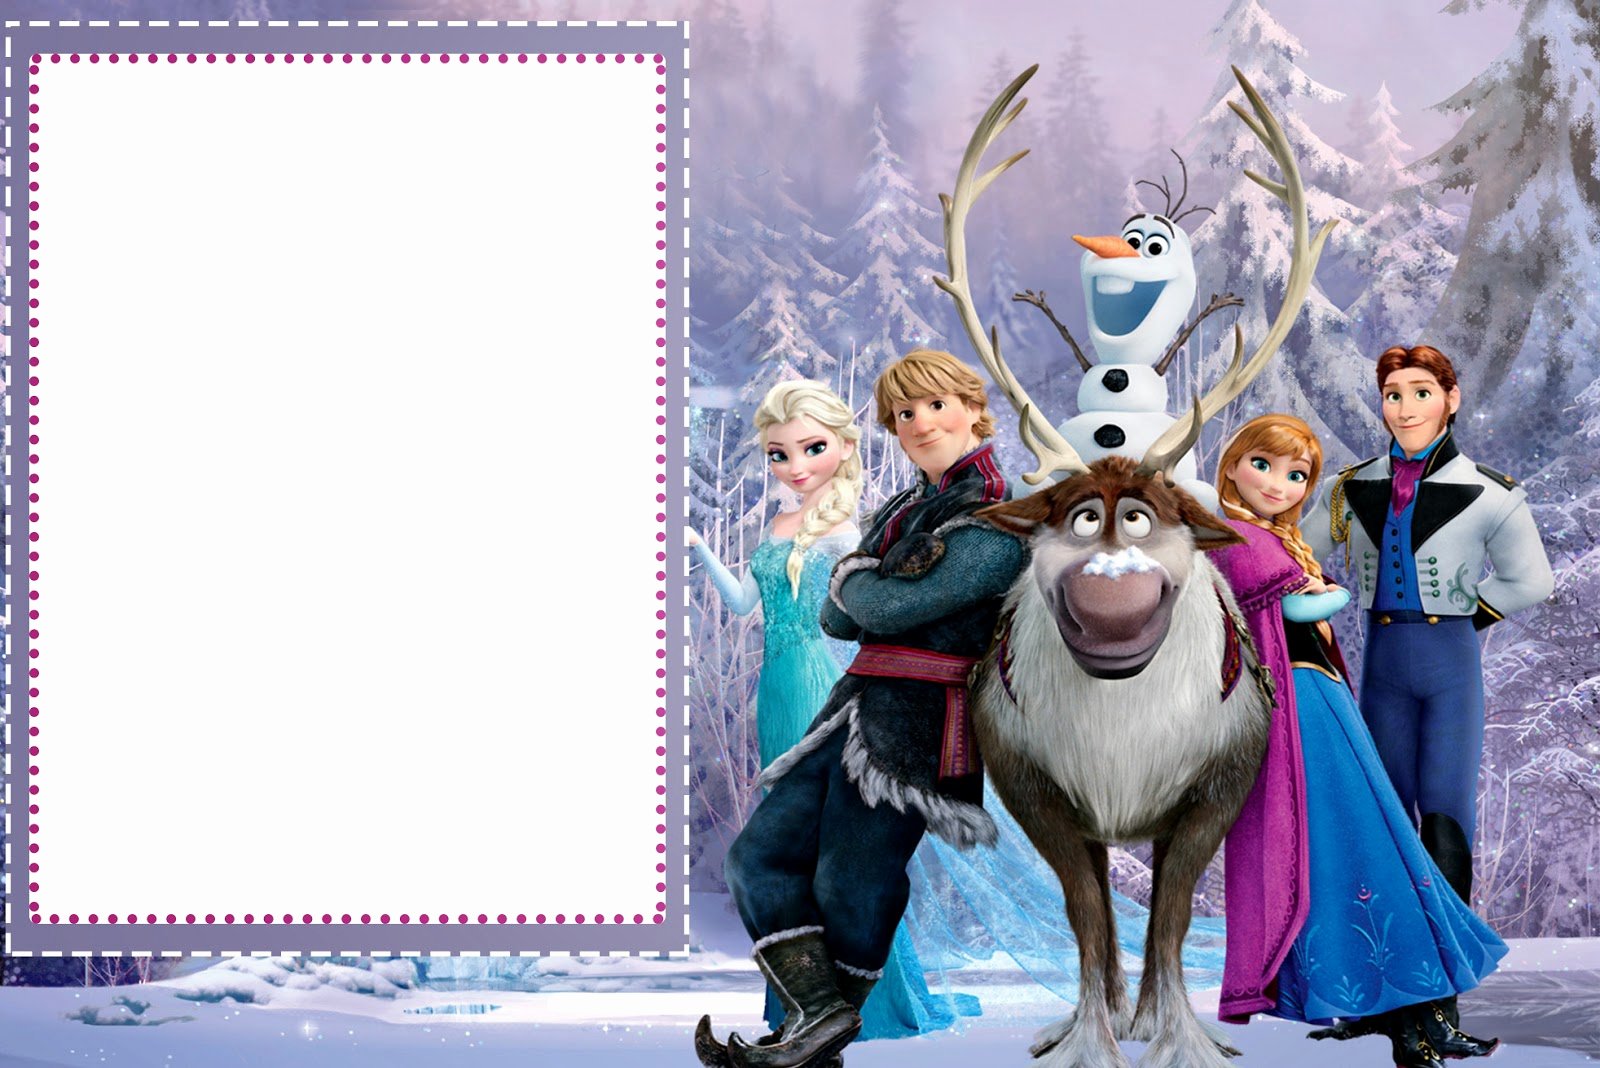 Frozen Birthday Card Printable Best Of Frozen Free Printable Cards or Party Invitations Oh My